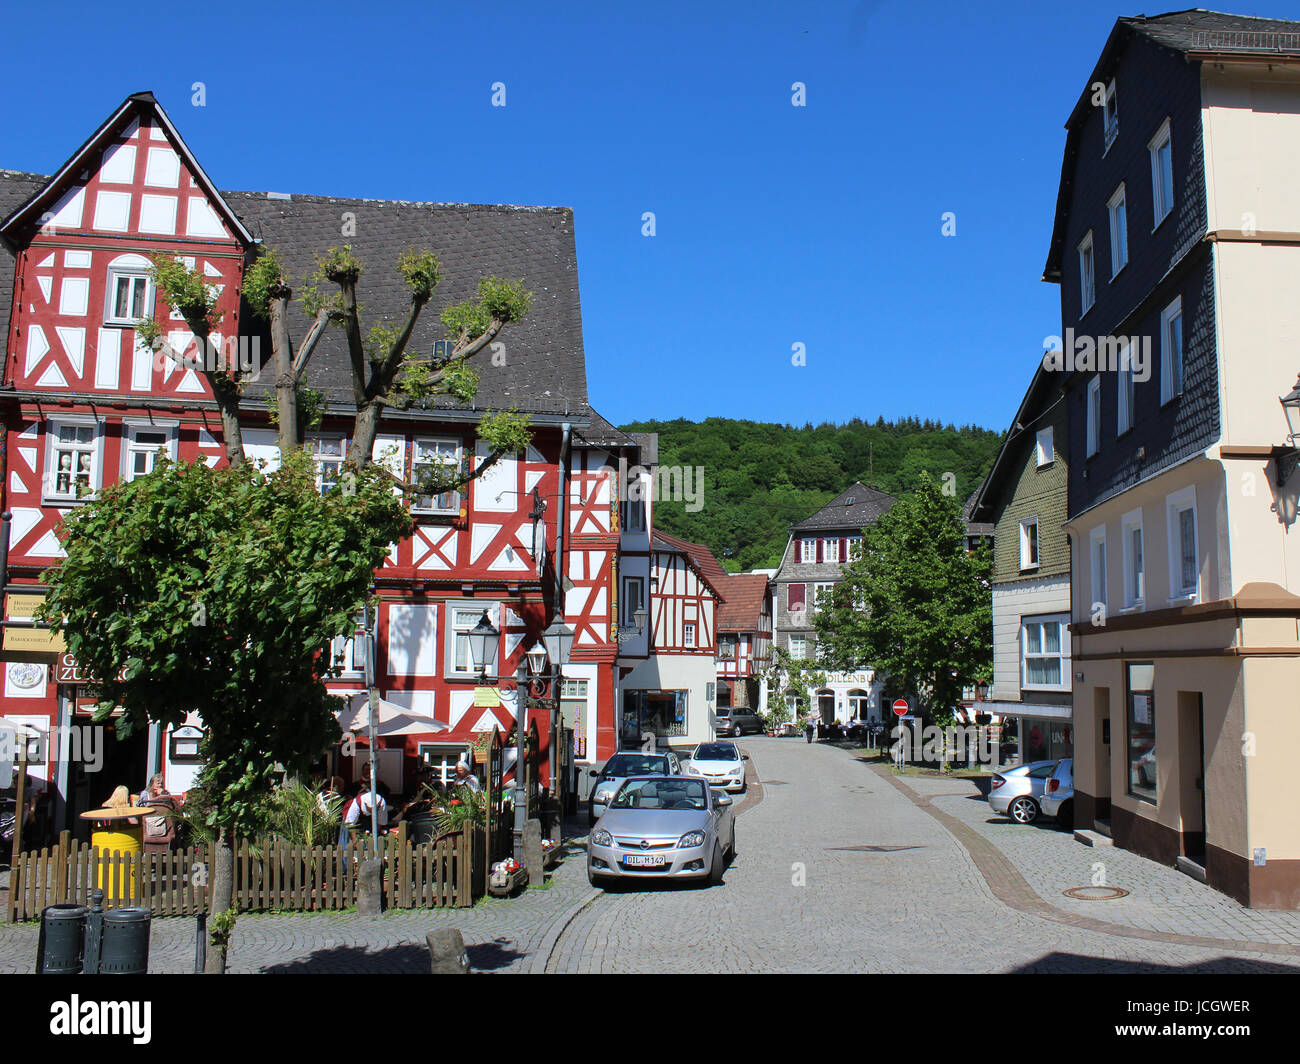 DILLENBURG, GERMANY, MAY 27 2017: View of the historic old town center of Dillenburg in Hesse which is a popular tourist destination and part of the ' Stock Photo